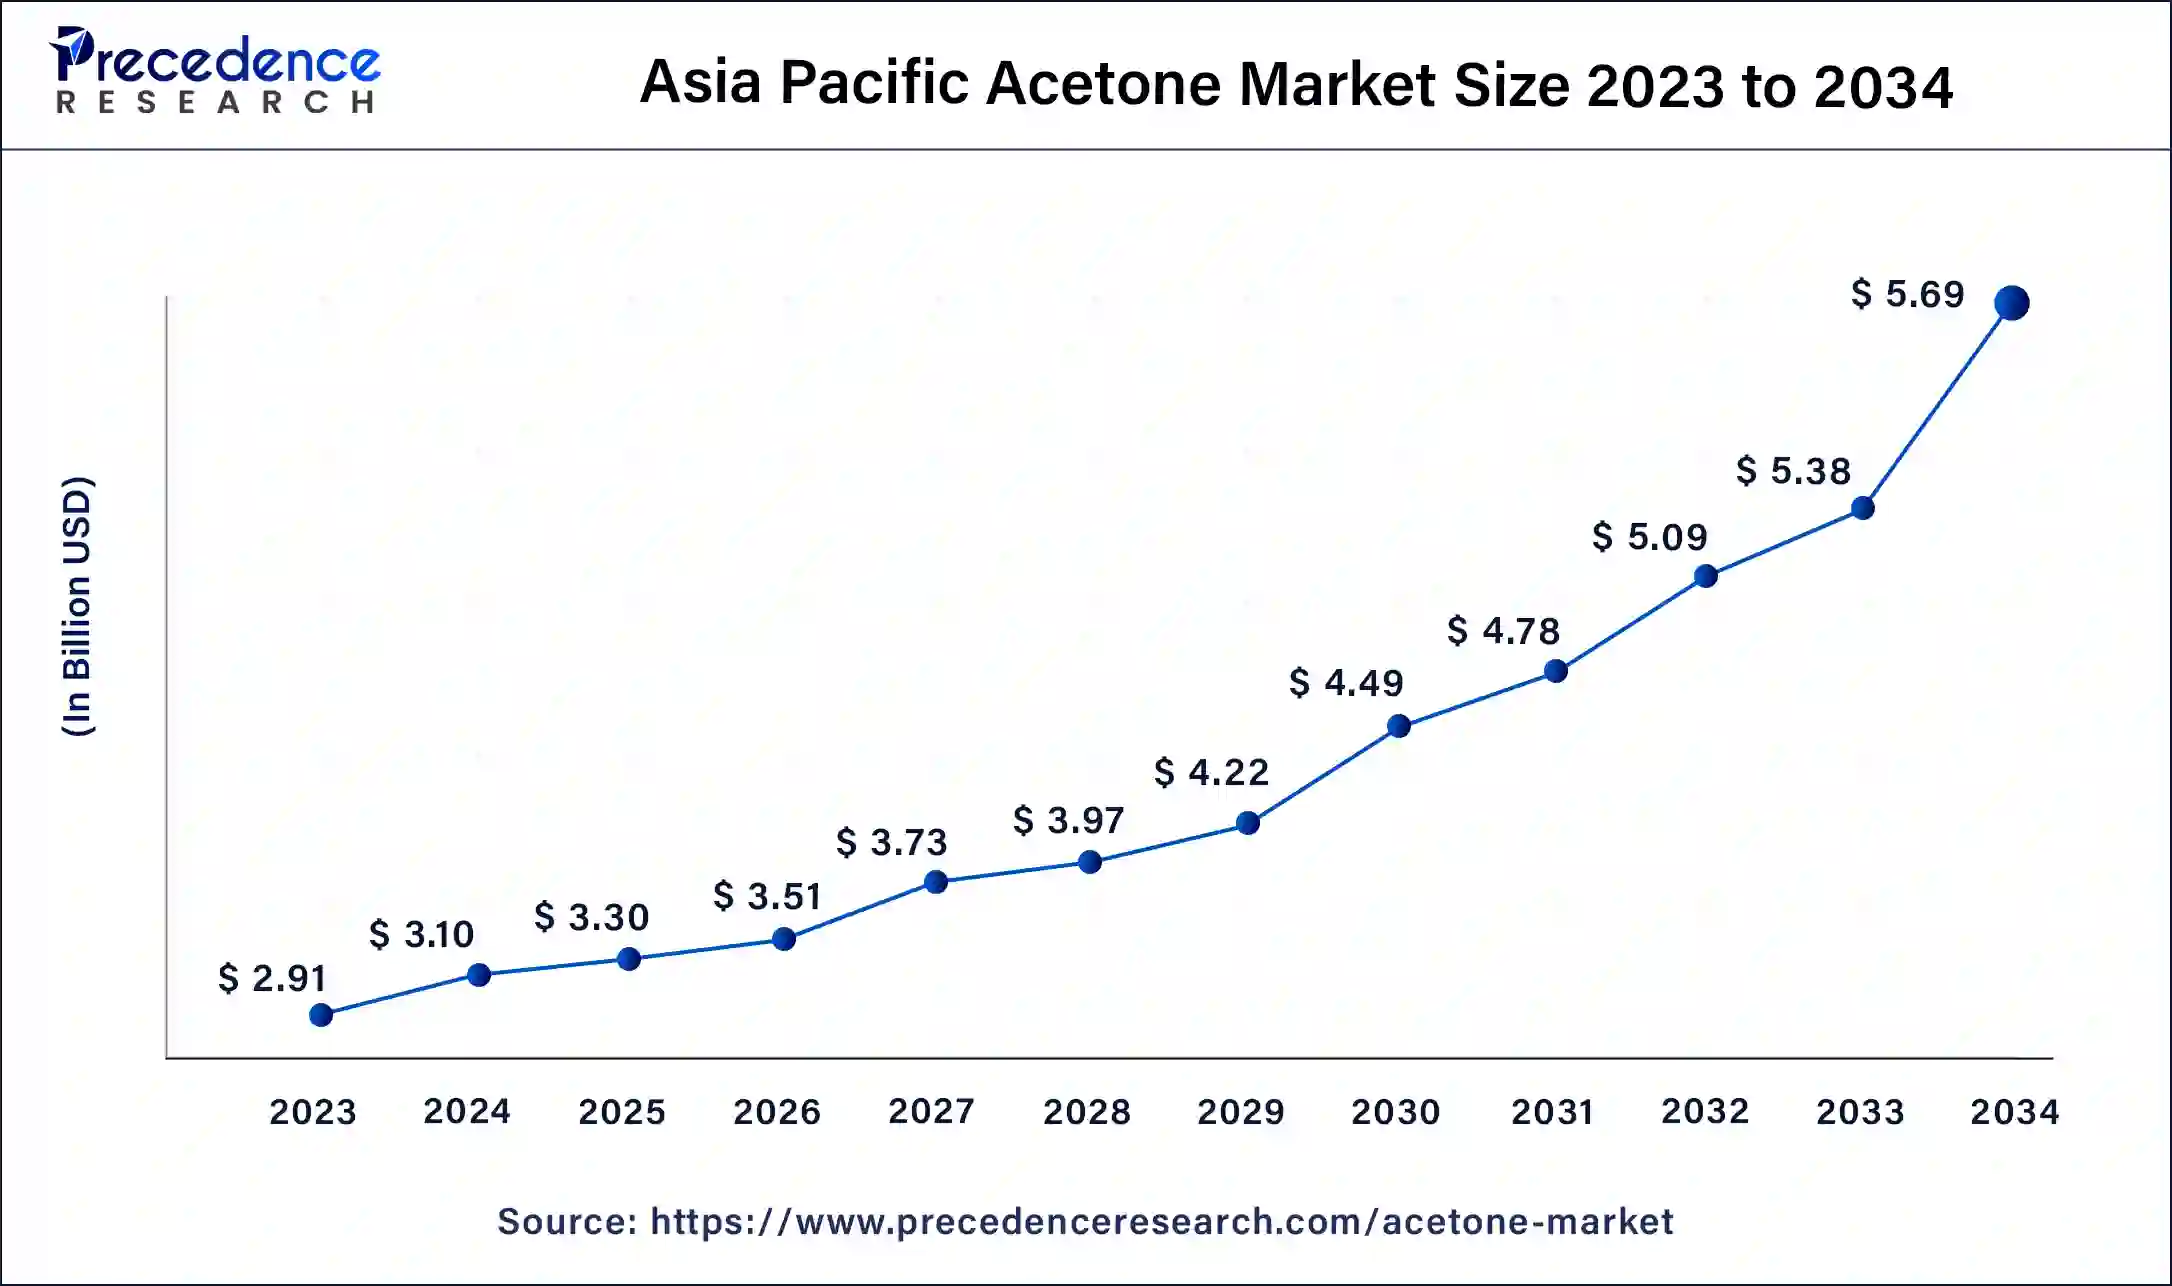 Asia Pacific Acetone Market Size 2024 To 2034